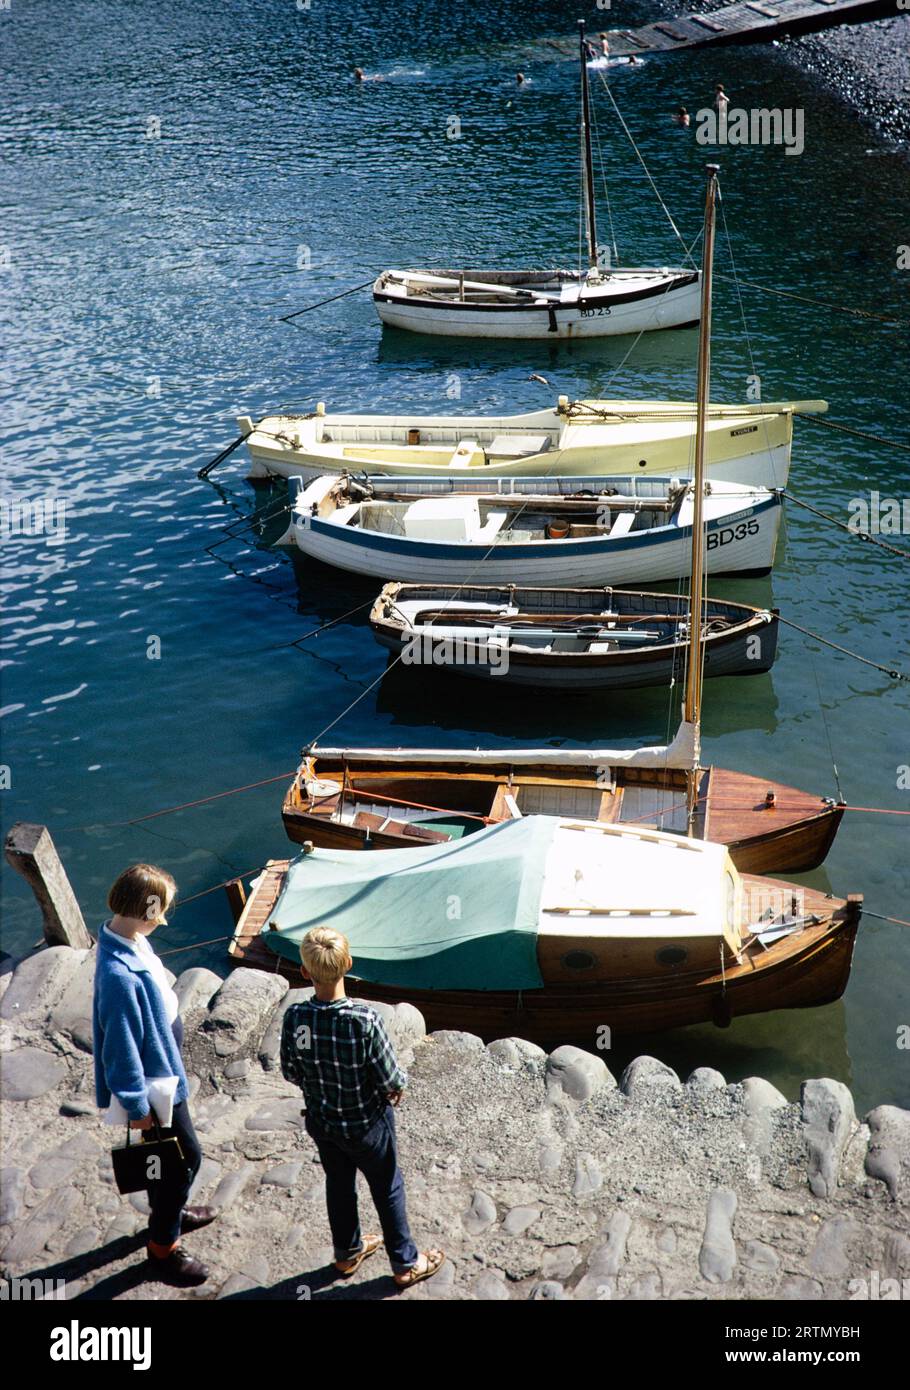 Boats in harbour, Clovelly, North Devon, England UK September 1968 Stock Photo